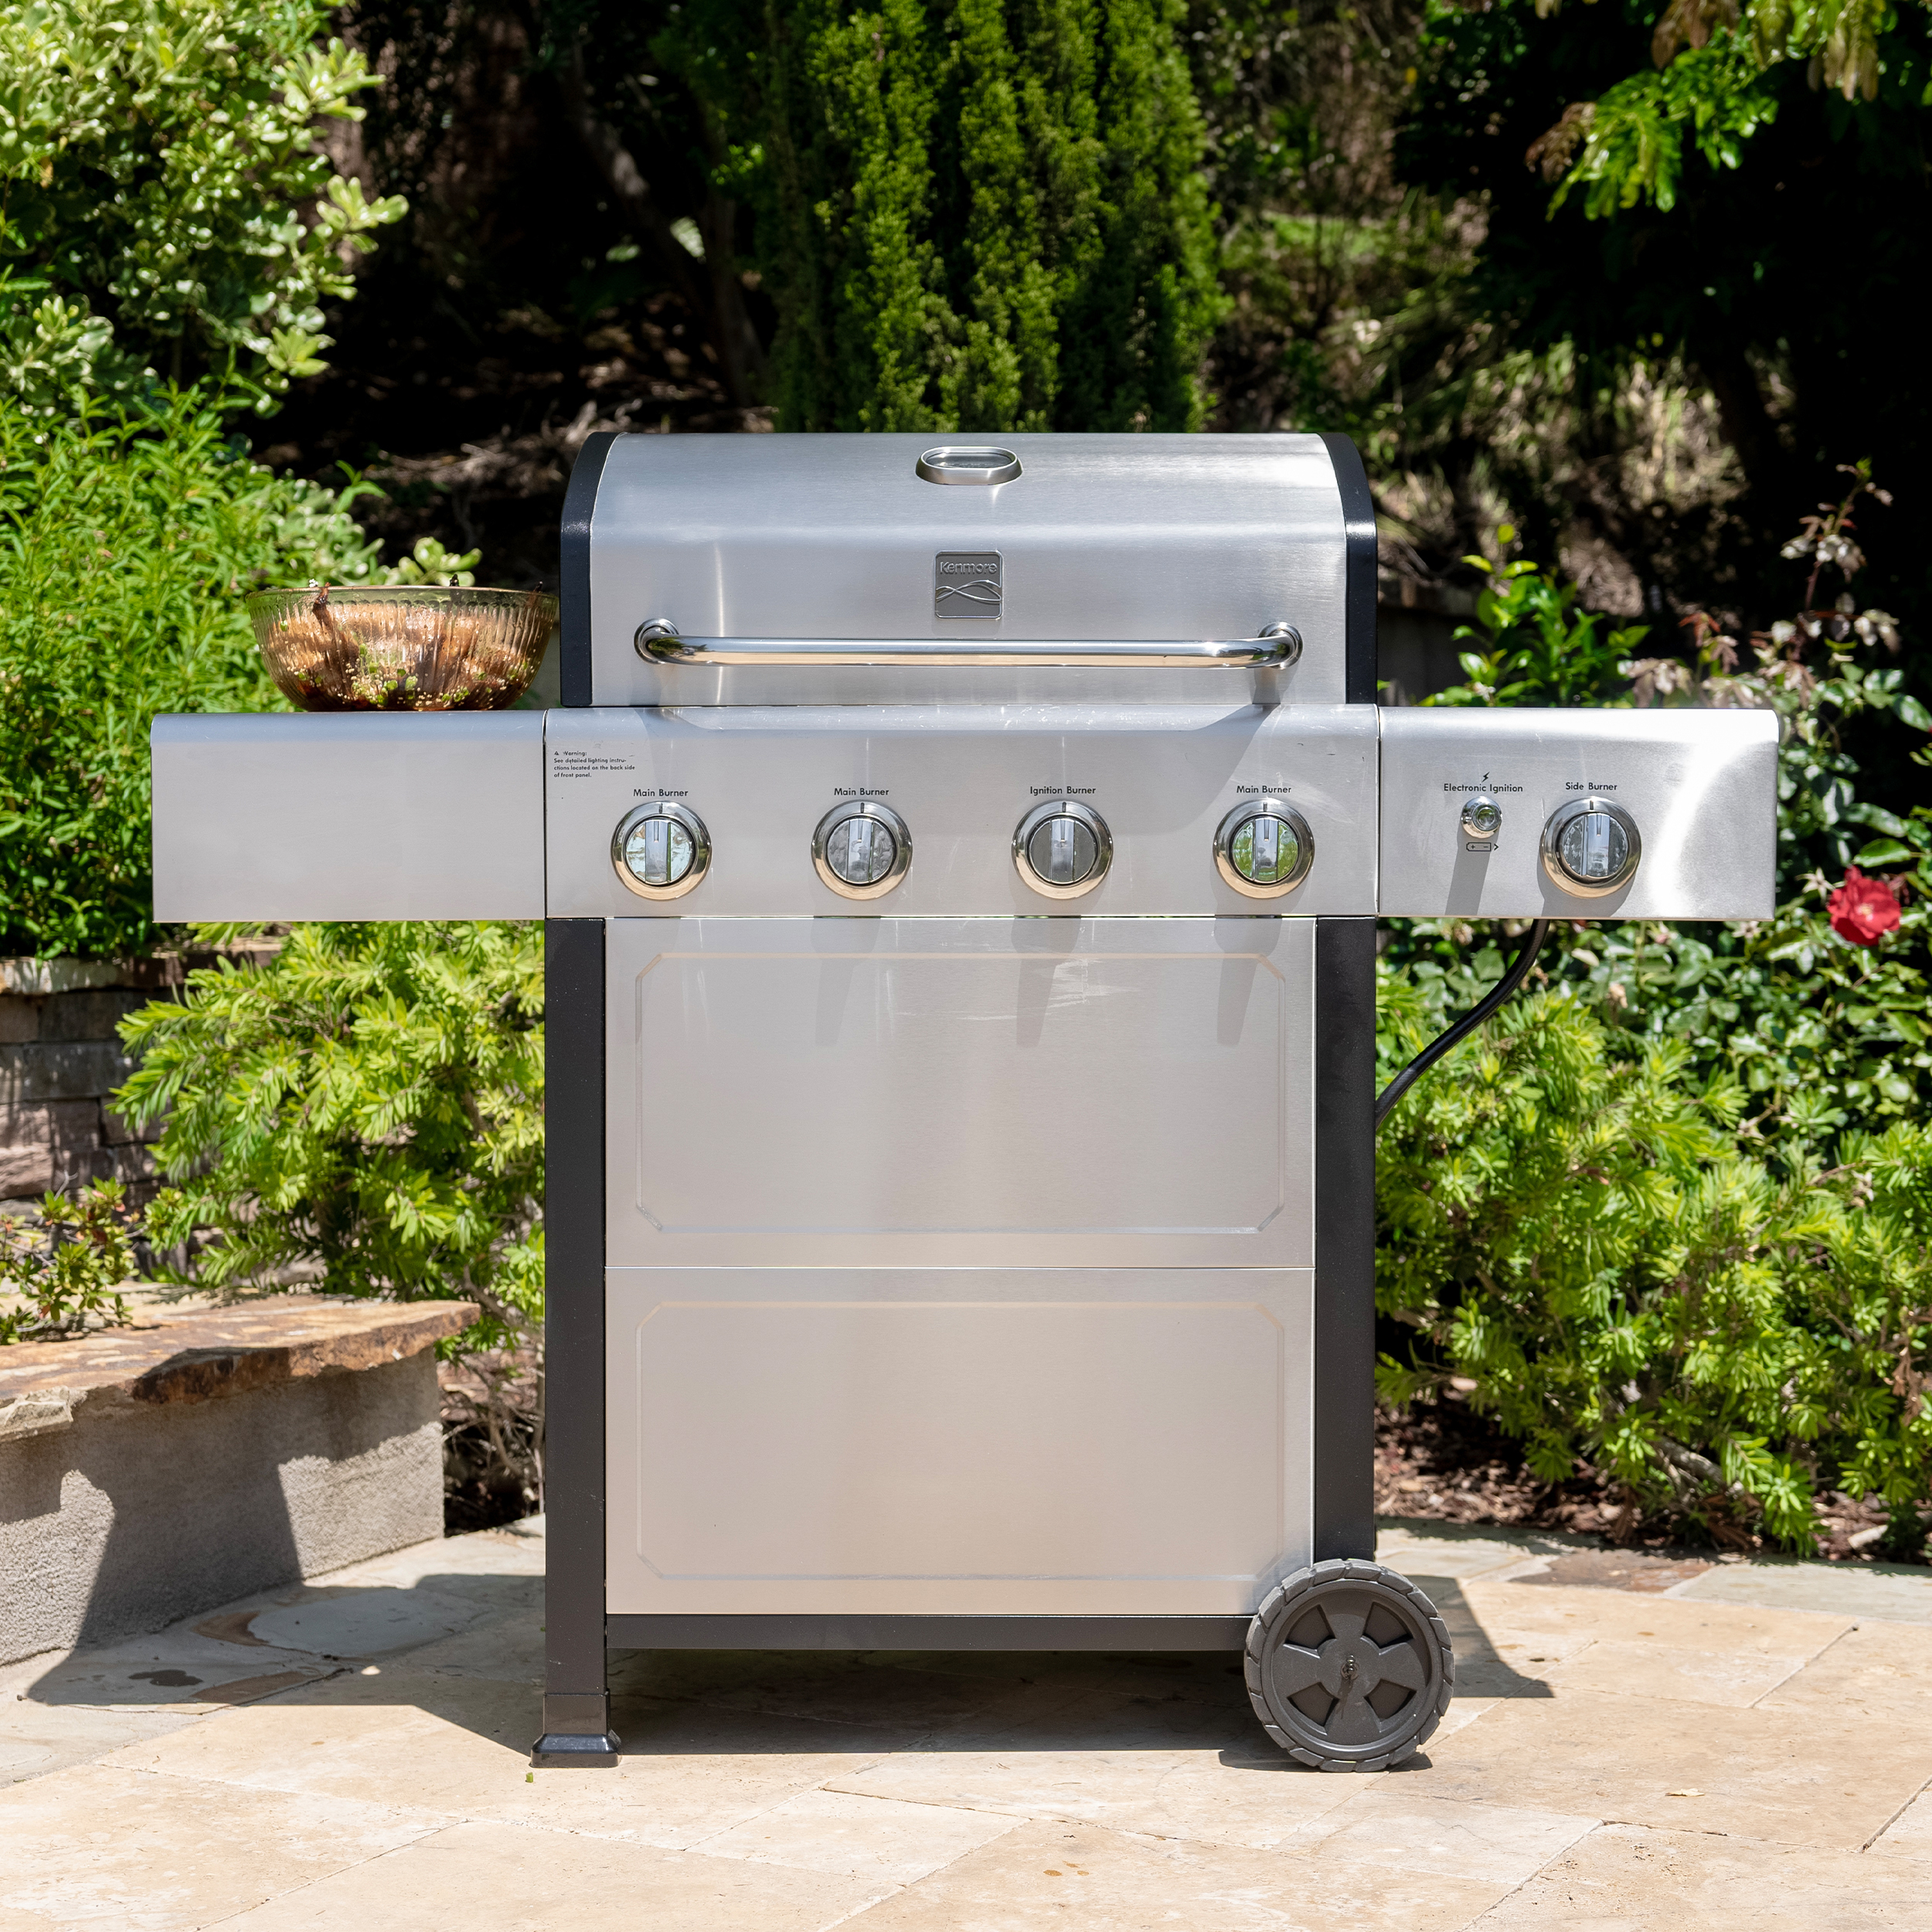 Kenmore 4-Burner Outdoor Propane Gas Grill with Side Burner, Open Cart, Stainless Steel - image 1 of 13